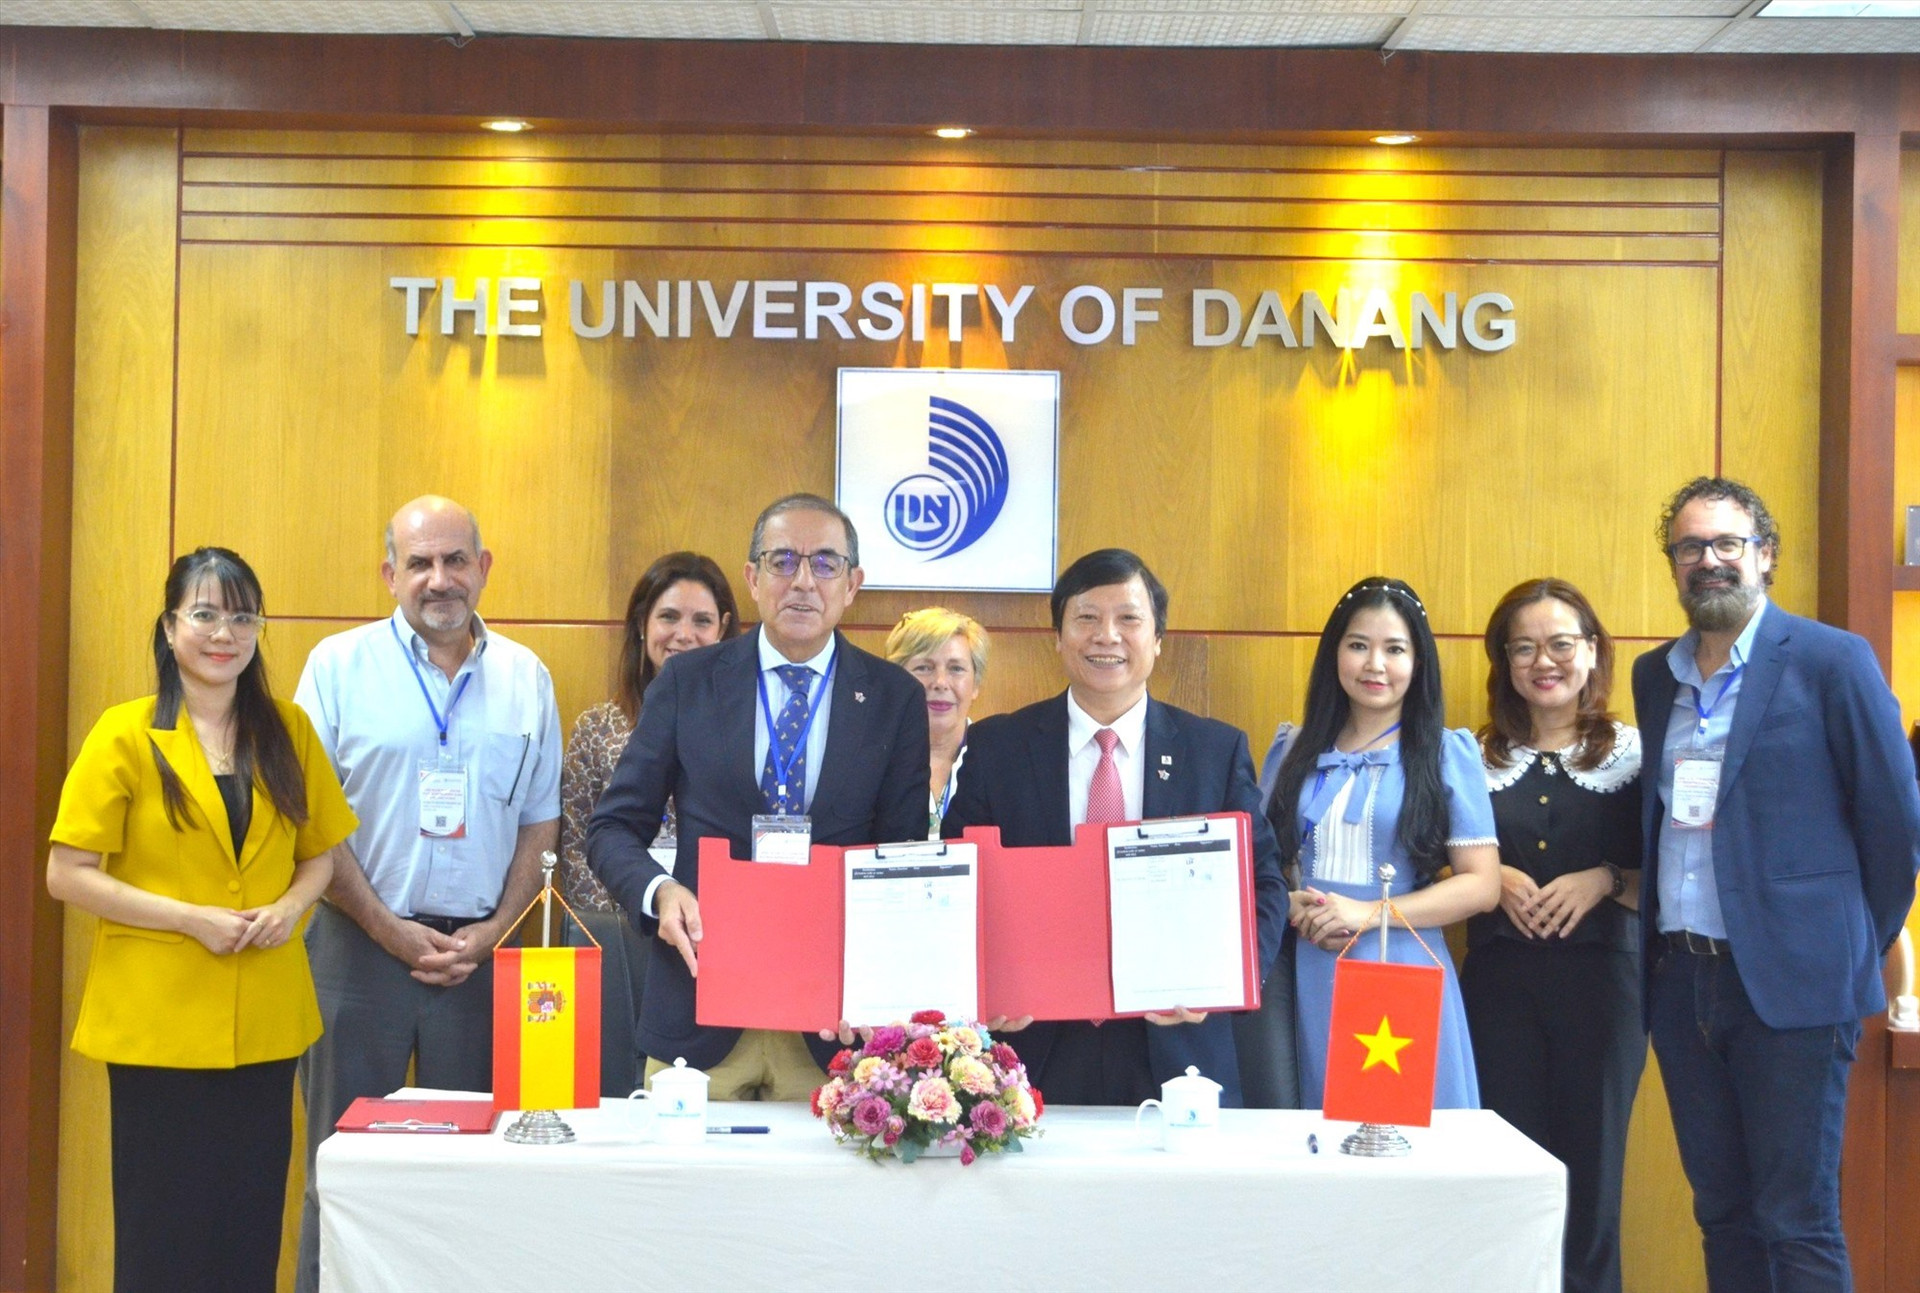 Leaders of the University of Danang and the University of Seville signed a memorandum of cooperation.